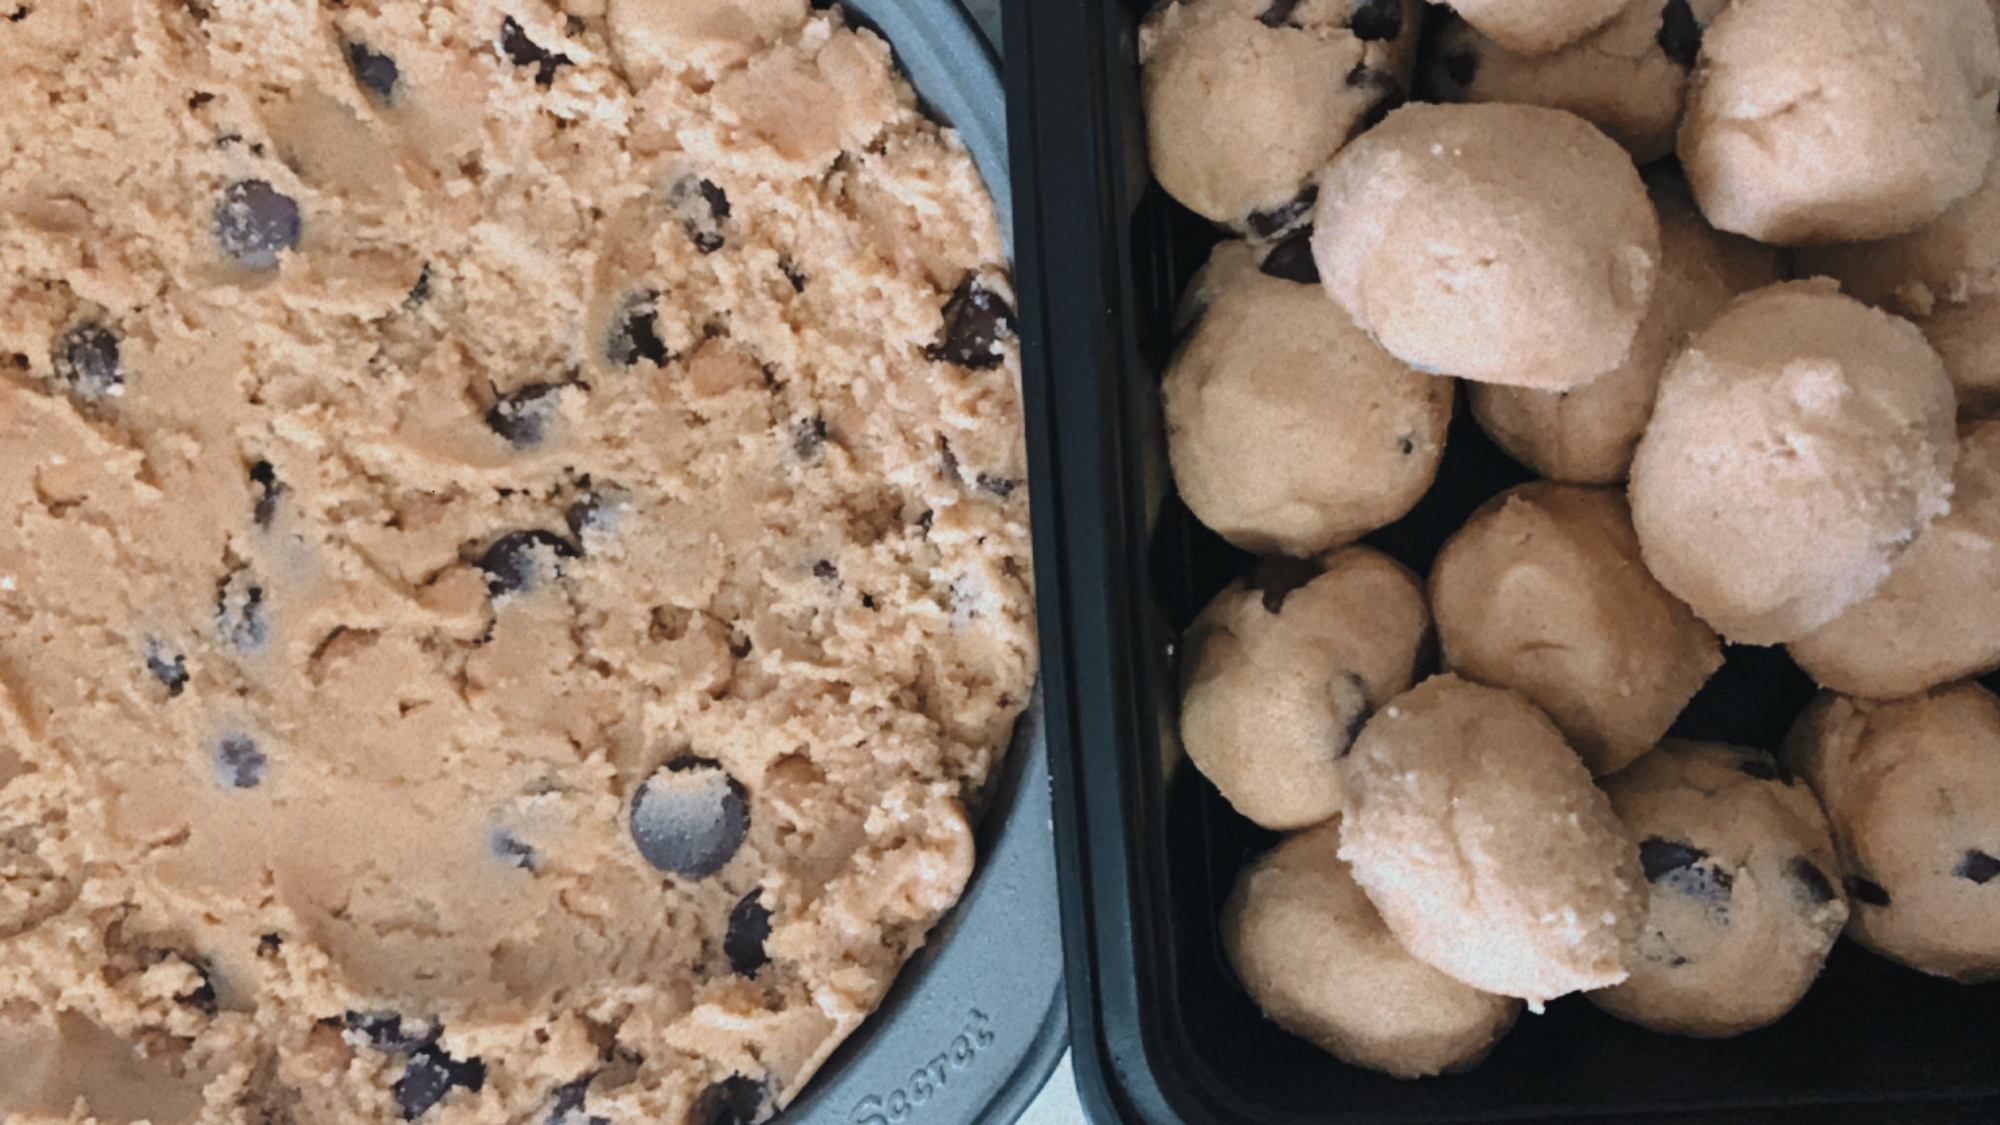 Cookie Base and Gold Ball Shaped Cookie Dough to Freeze Easy and Delicious Cookie Ice Cream Cake Recipe #recipe #food #foodie #dessert #birthdaycake #icecreamcake #cookiecake #cookieicecreamcake #cake #pie #cookiecakerecipe #simplybysimone Simone Piliero